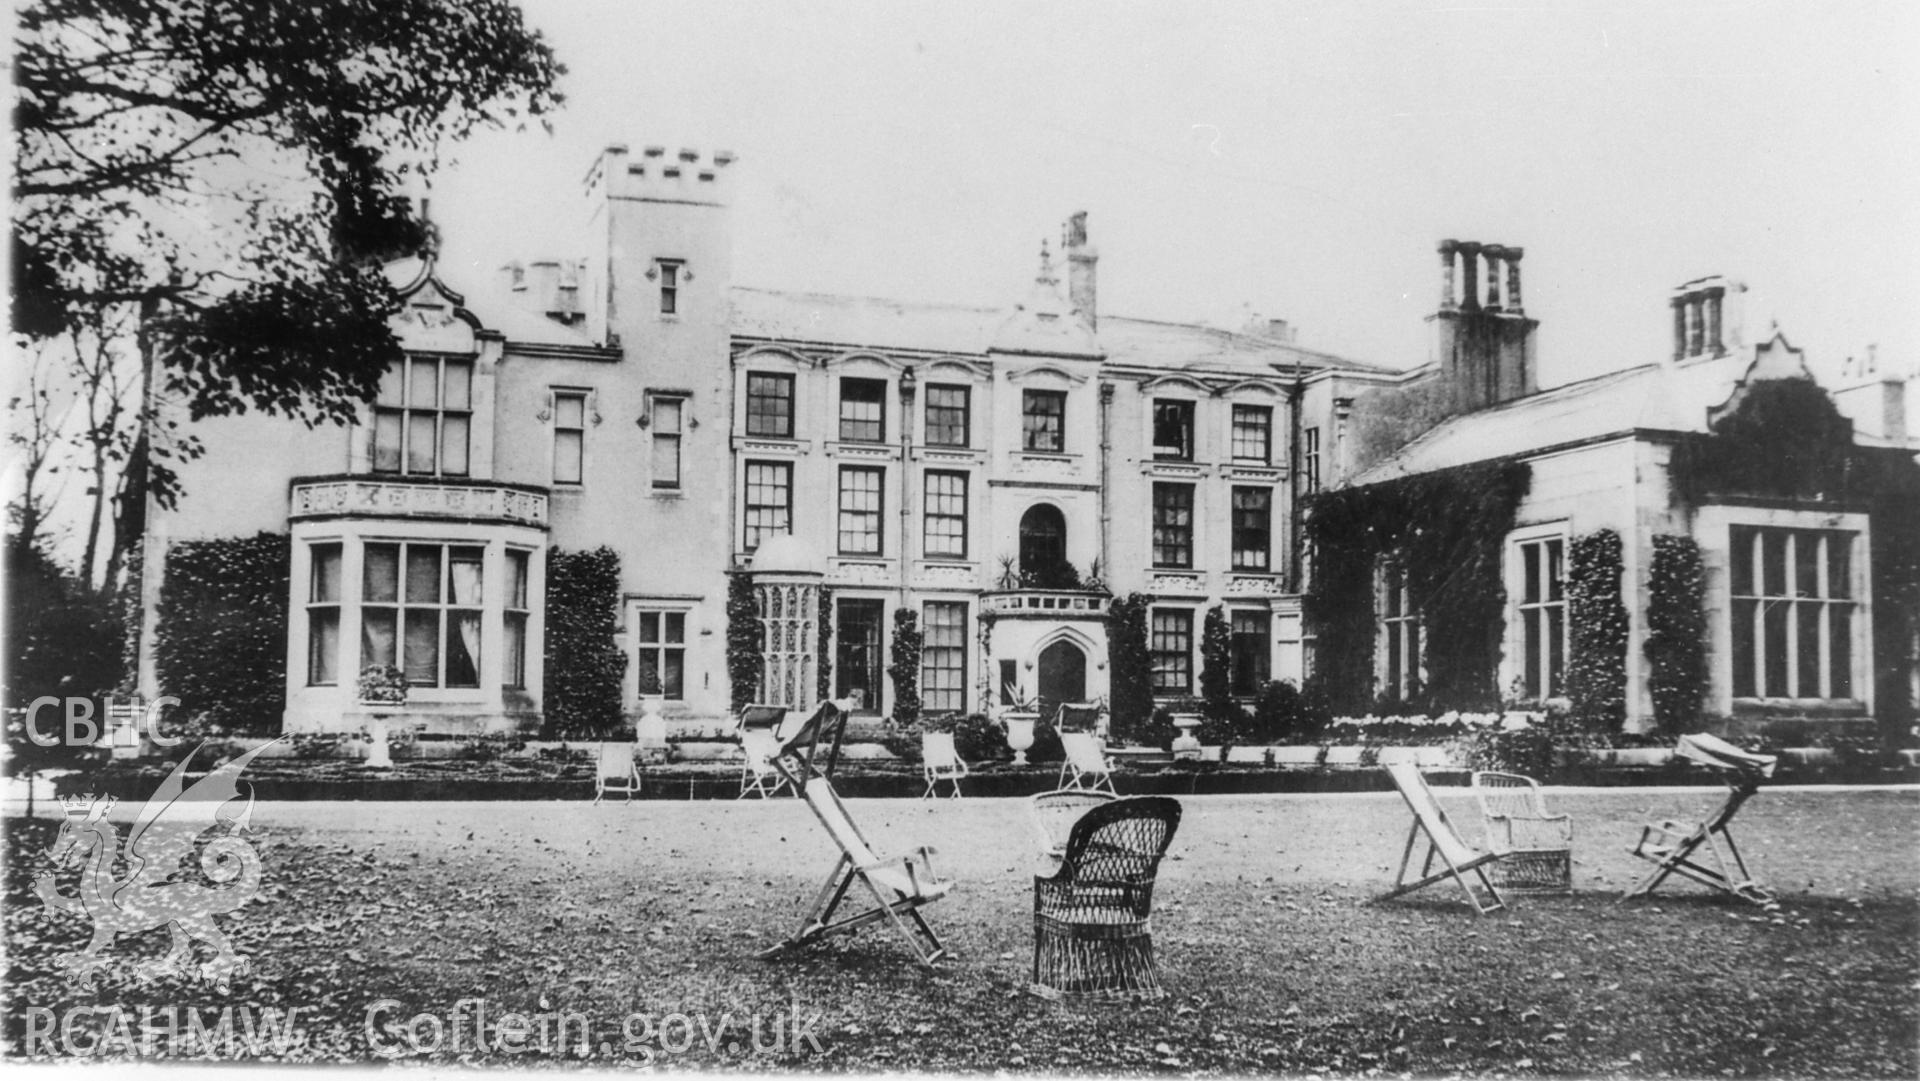 Black and white print of Penrhos, copied from a photograph loaned by Thomas Lloyd.